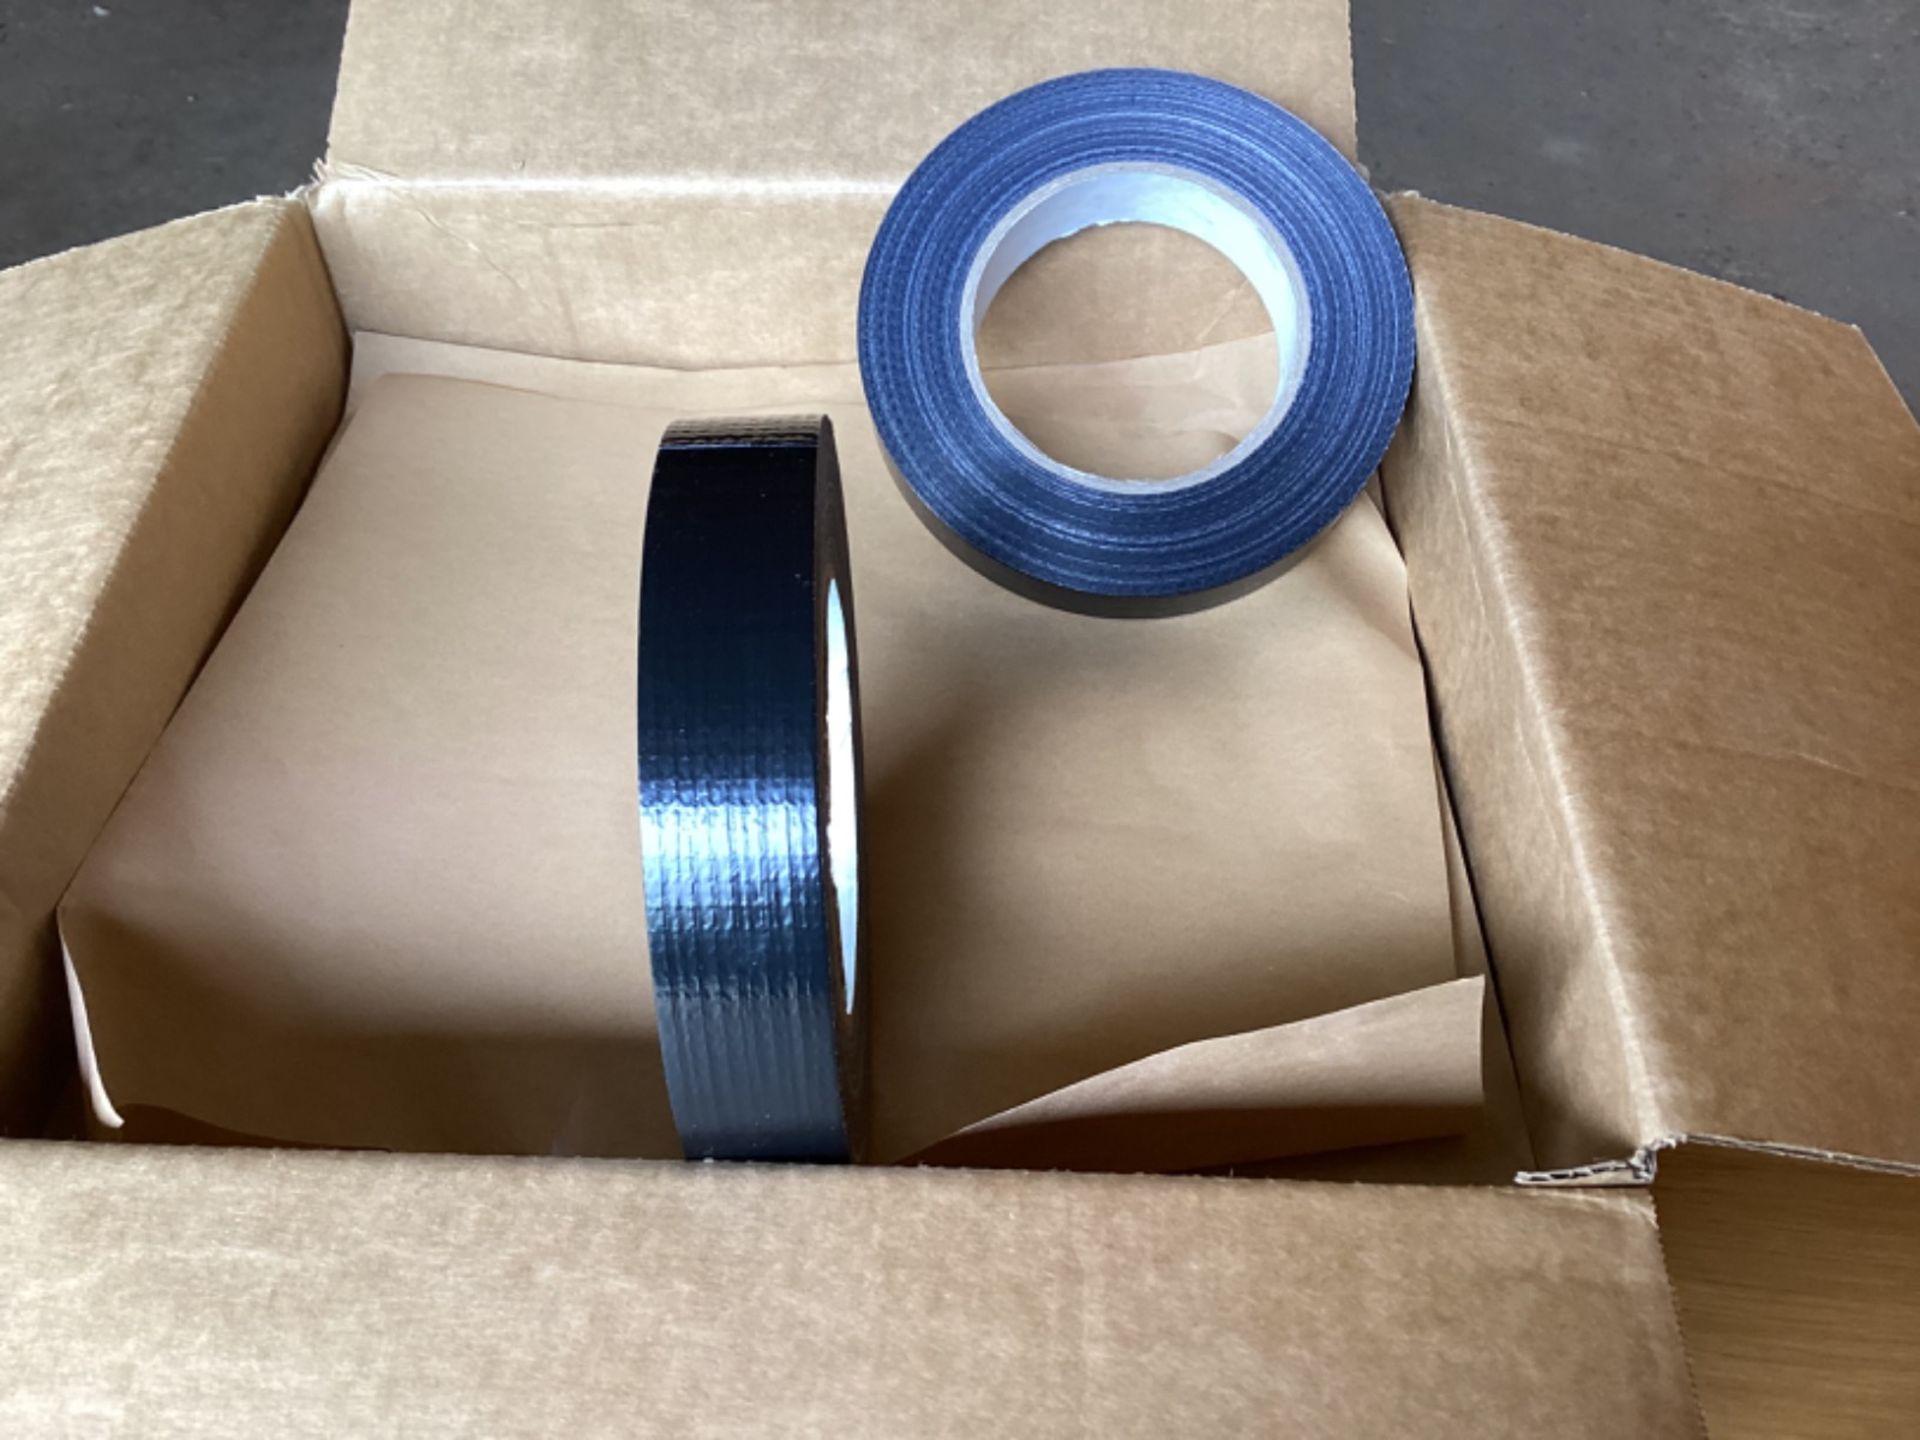 40 ROLLS OF 25 MM CLOTH TAPE - Image 2 of 2